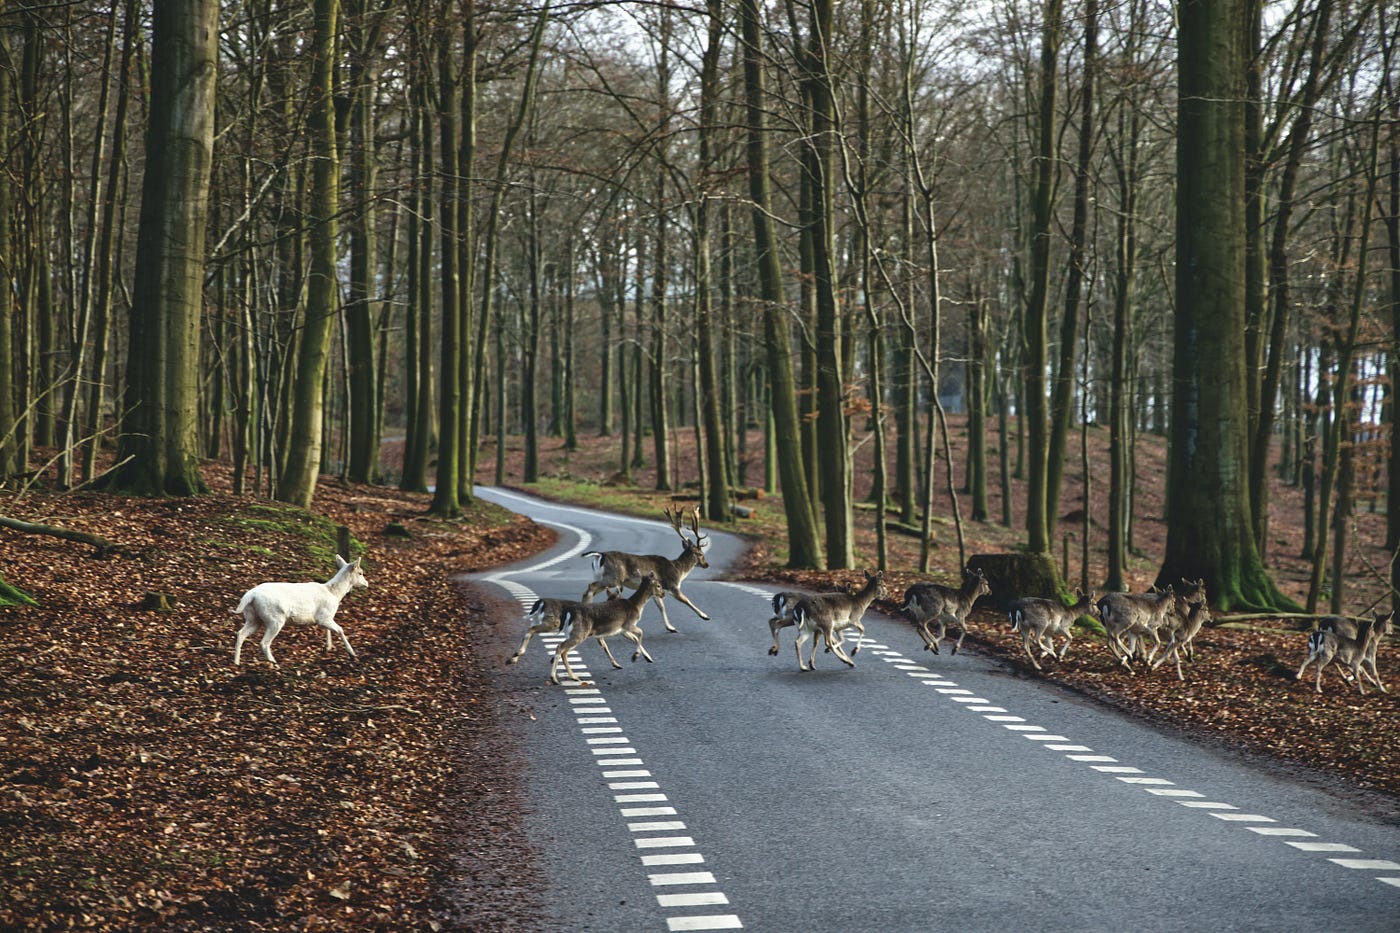 How to deal with animals on the road - Techniques for avoiding collisions with animals